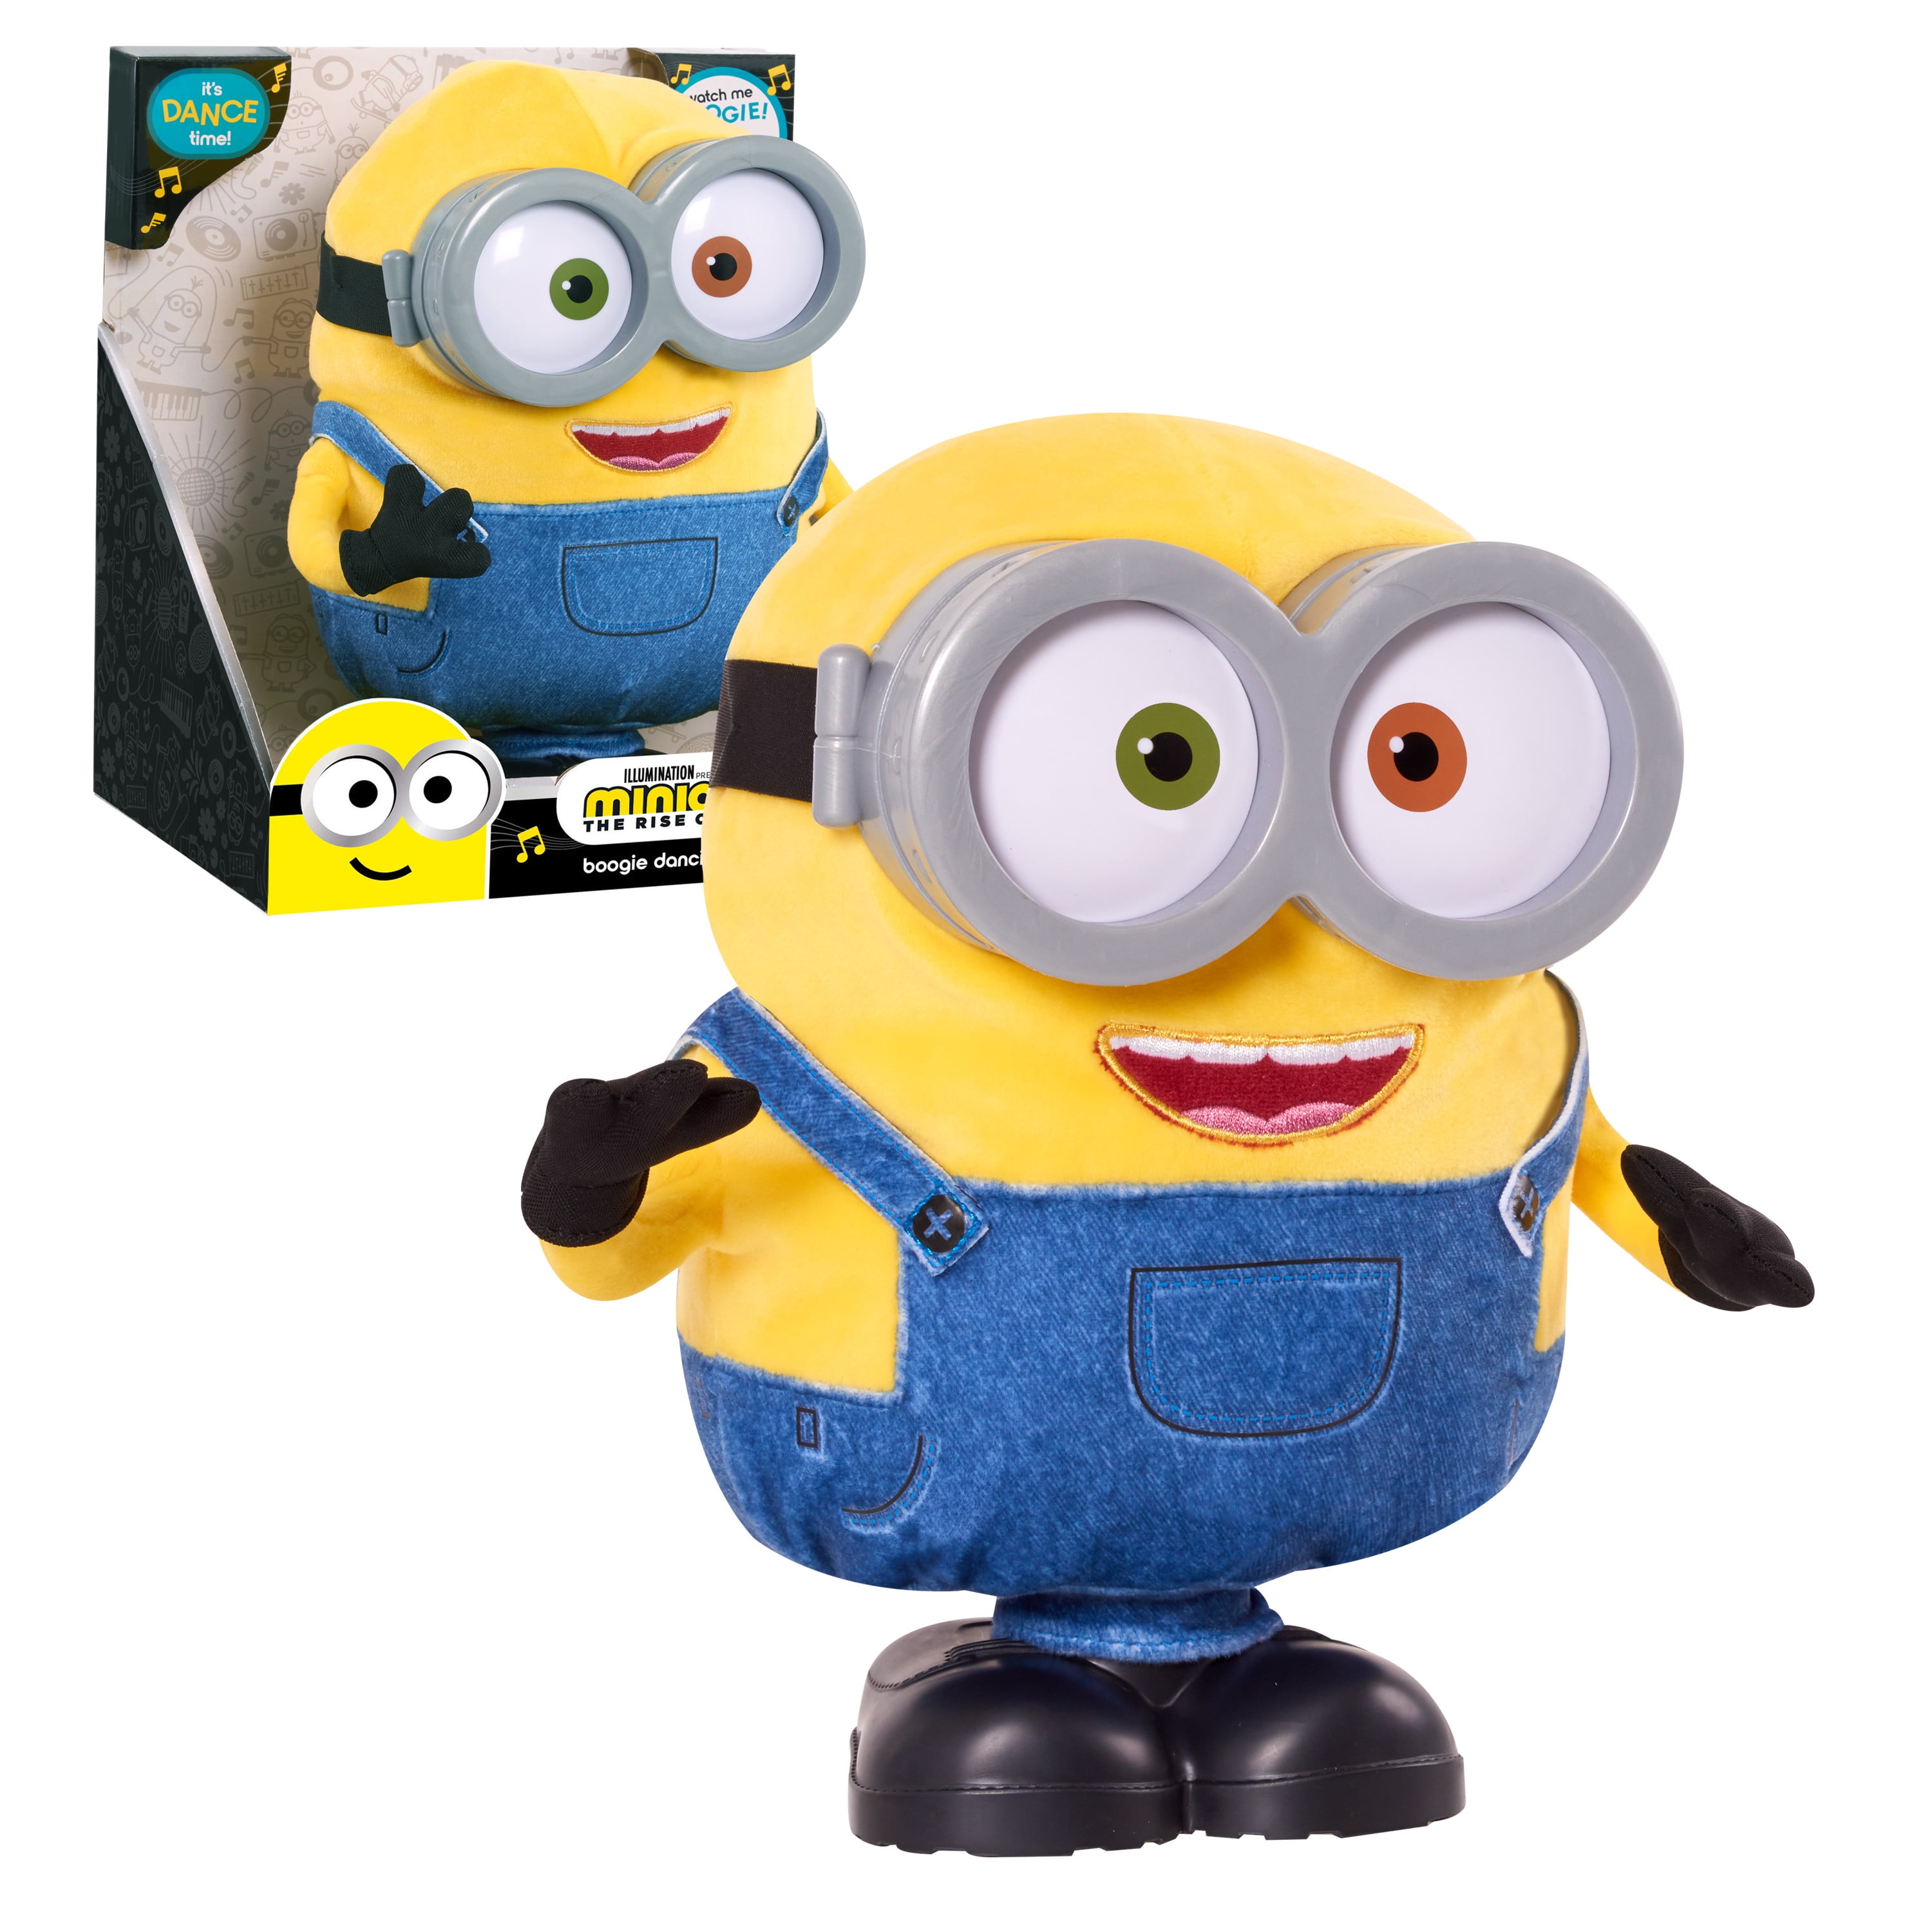 BRAND NEW DESPICABLE ME 2 10" CUDDLY KEVIN MINION SOFT PLUSH TOY 